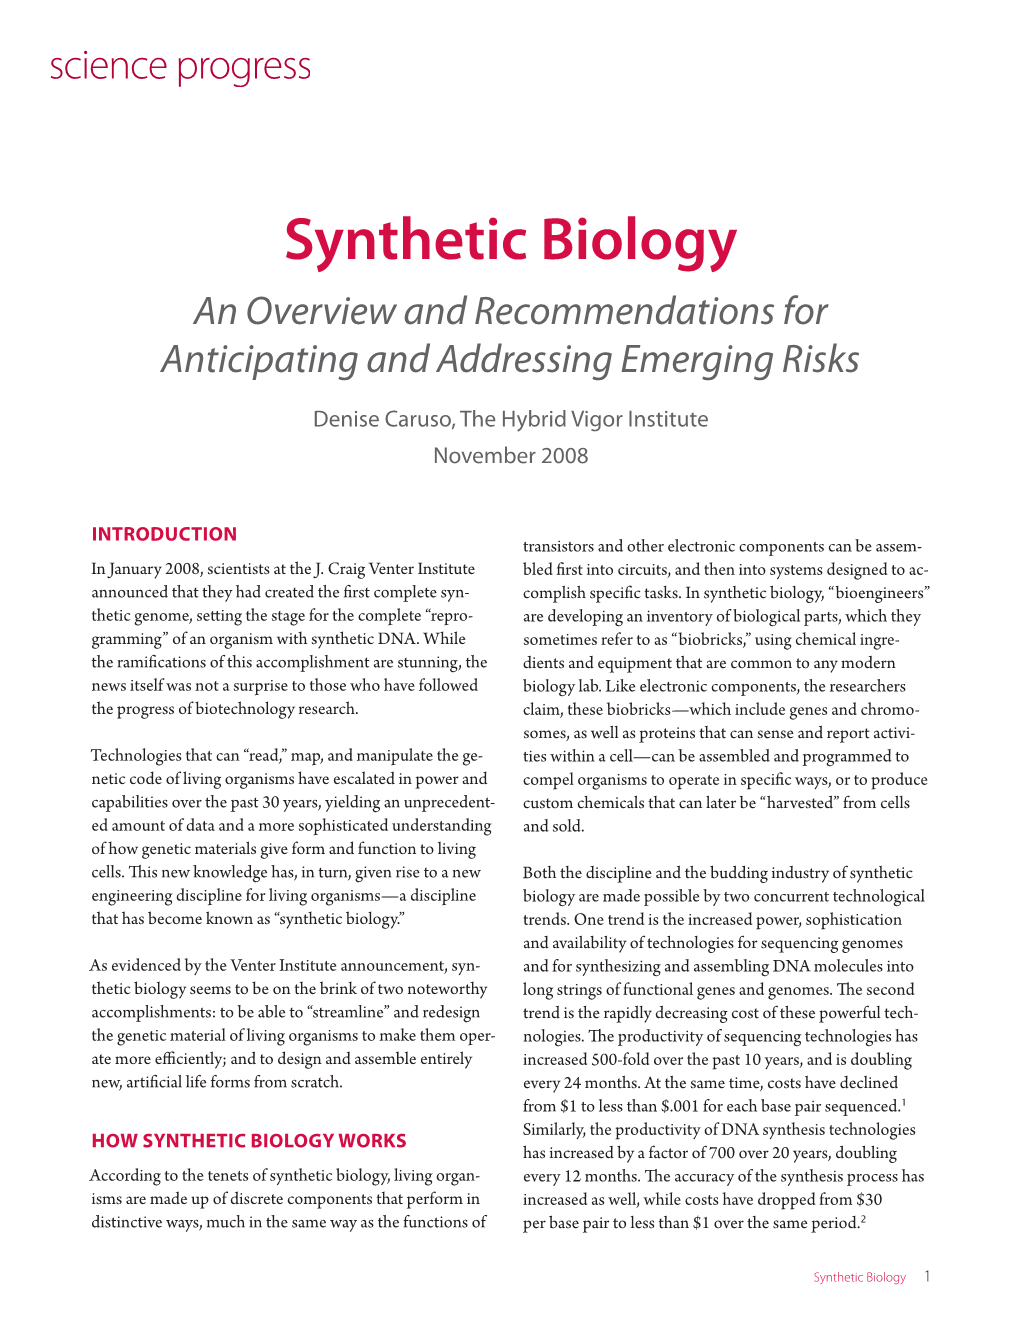 Synthetic Biology an Overview and Recommendations for Anticipating and Addressing Emerging Risks